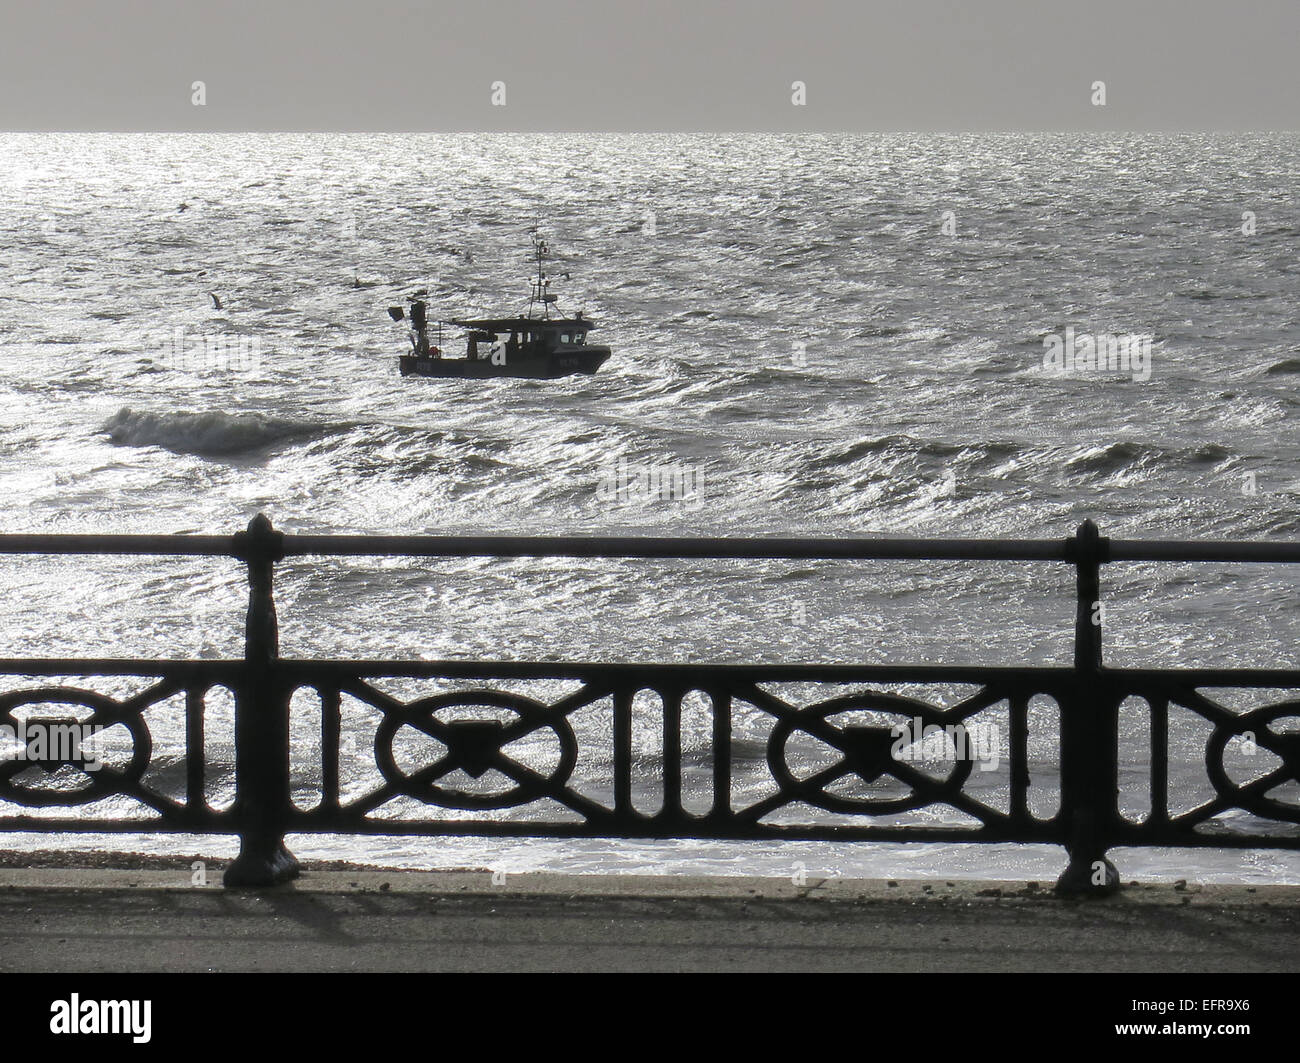 A fishing boat struggles against a westerly tide off Hove Lawns promenade in the early morning sunlight in the glistening sea. Stock Photo